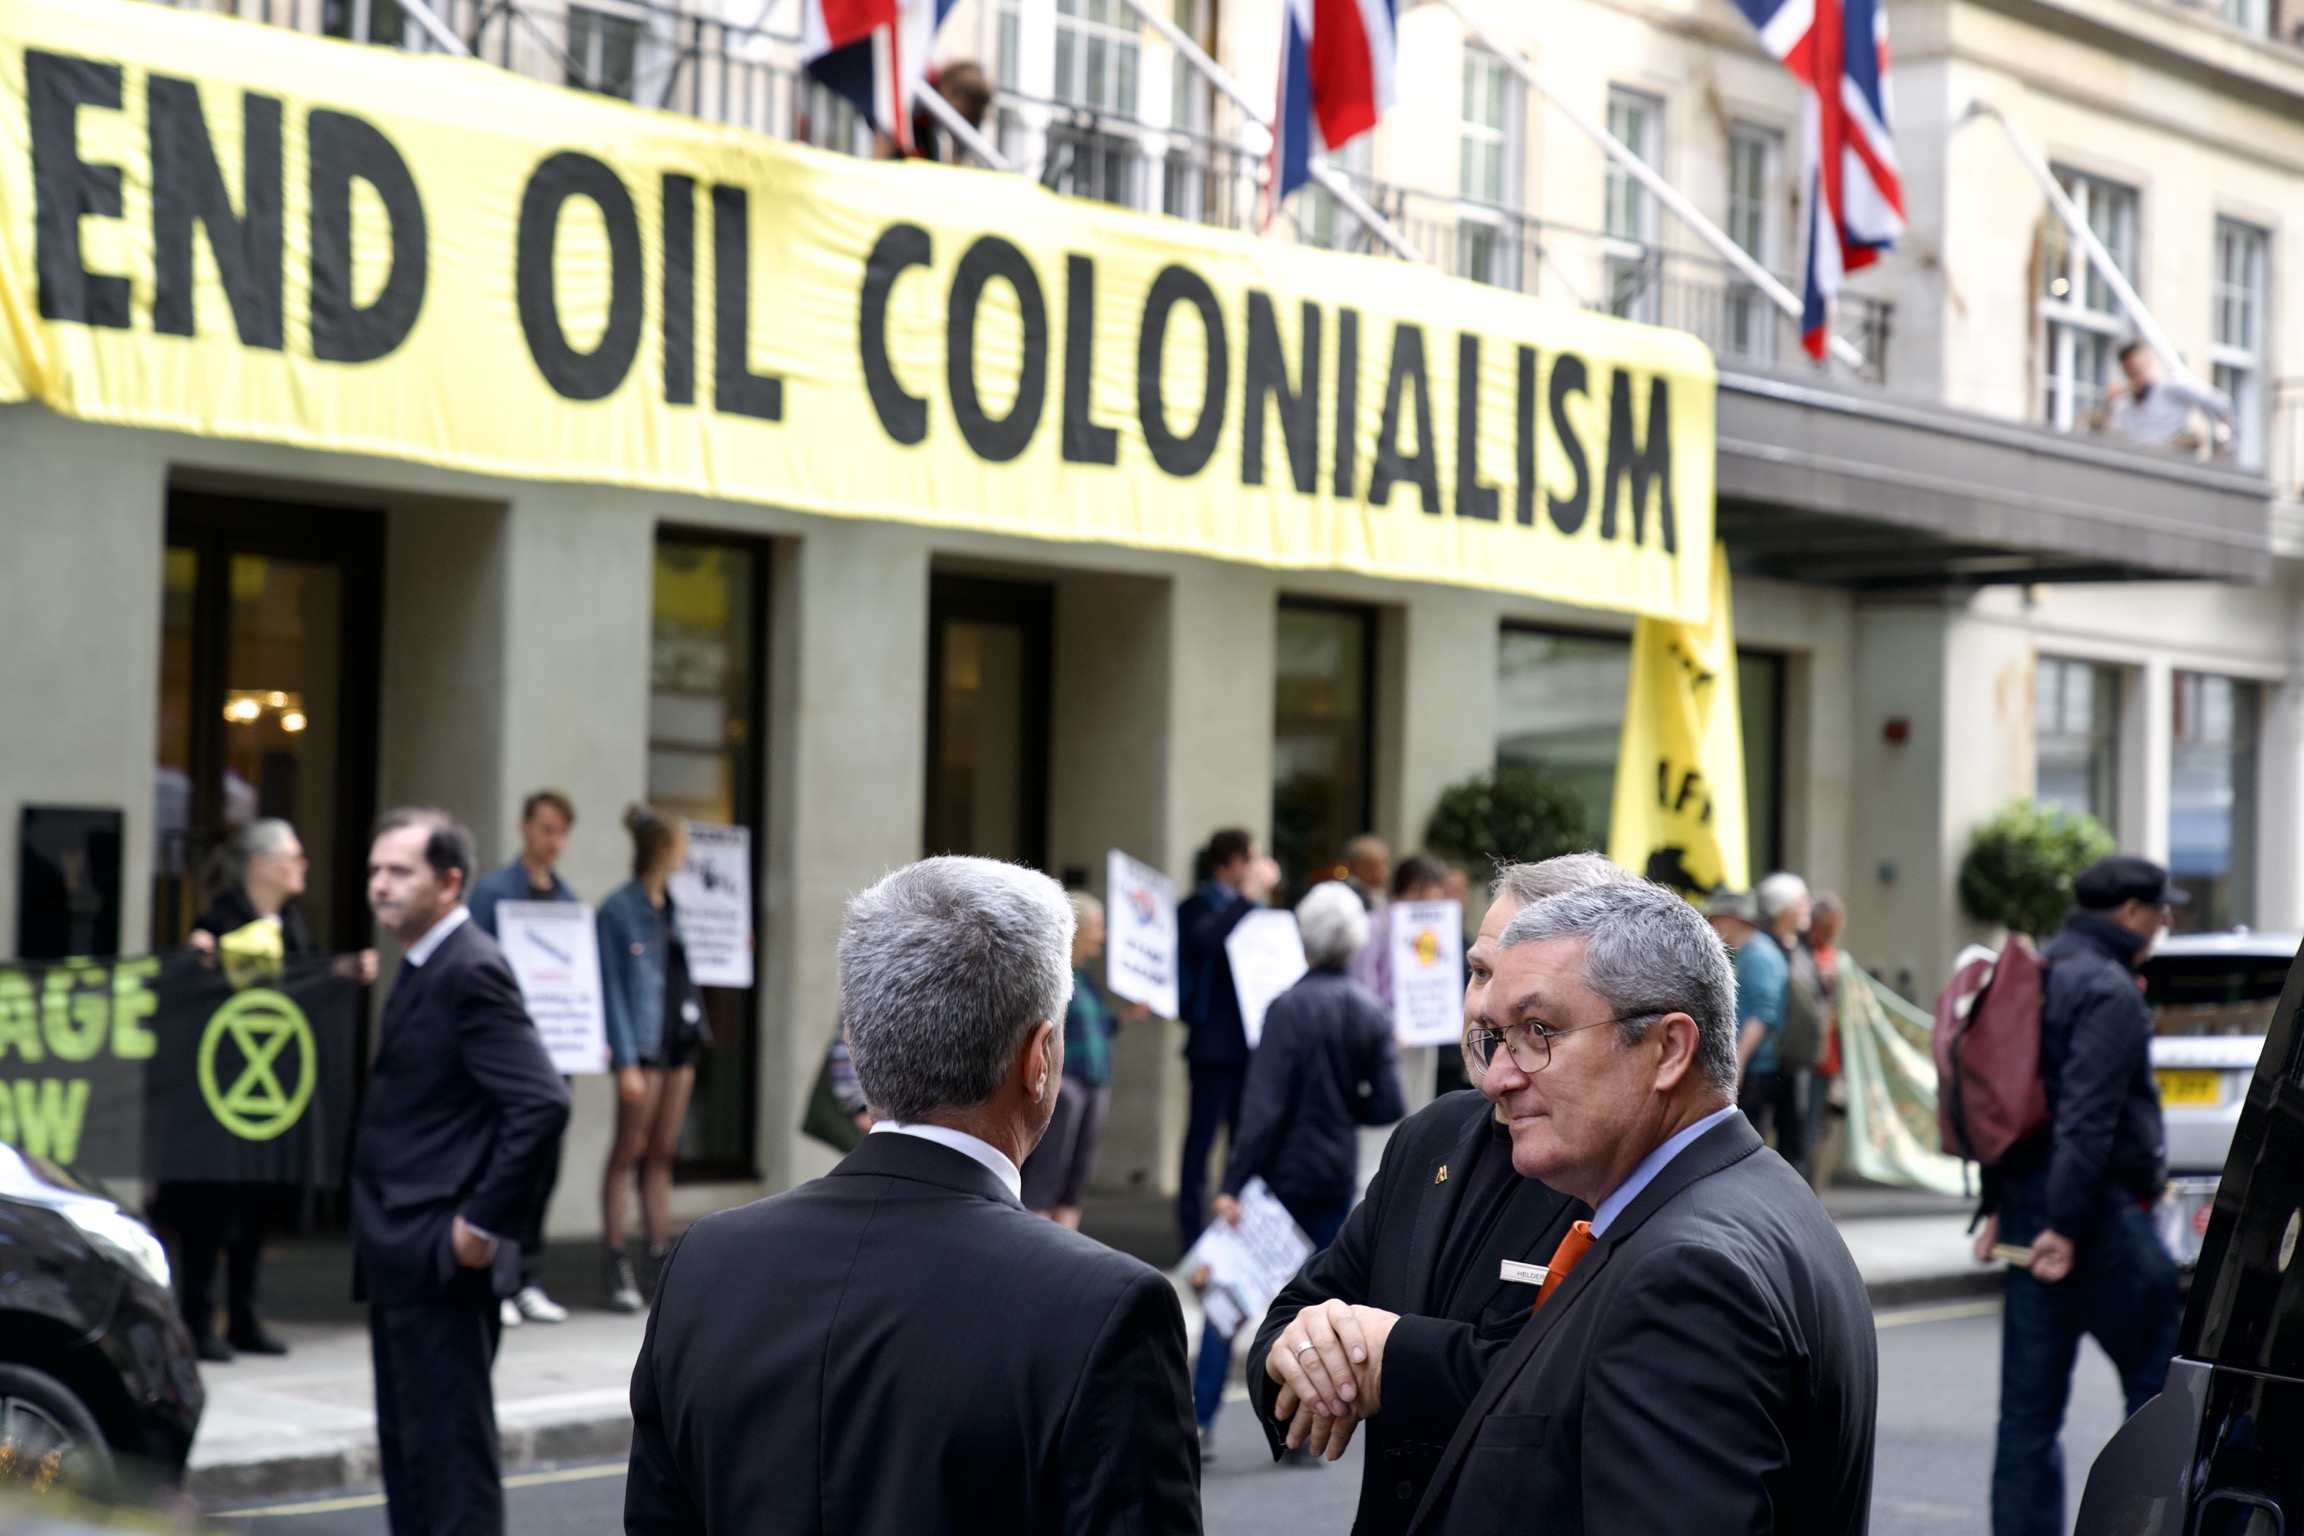 disrupt Africa Oil Conference in Mayfair - Extinction Rebellion UK - Extinction Rebellion